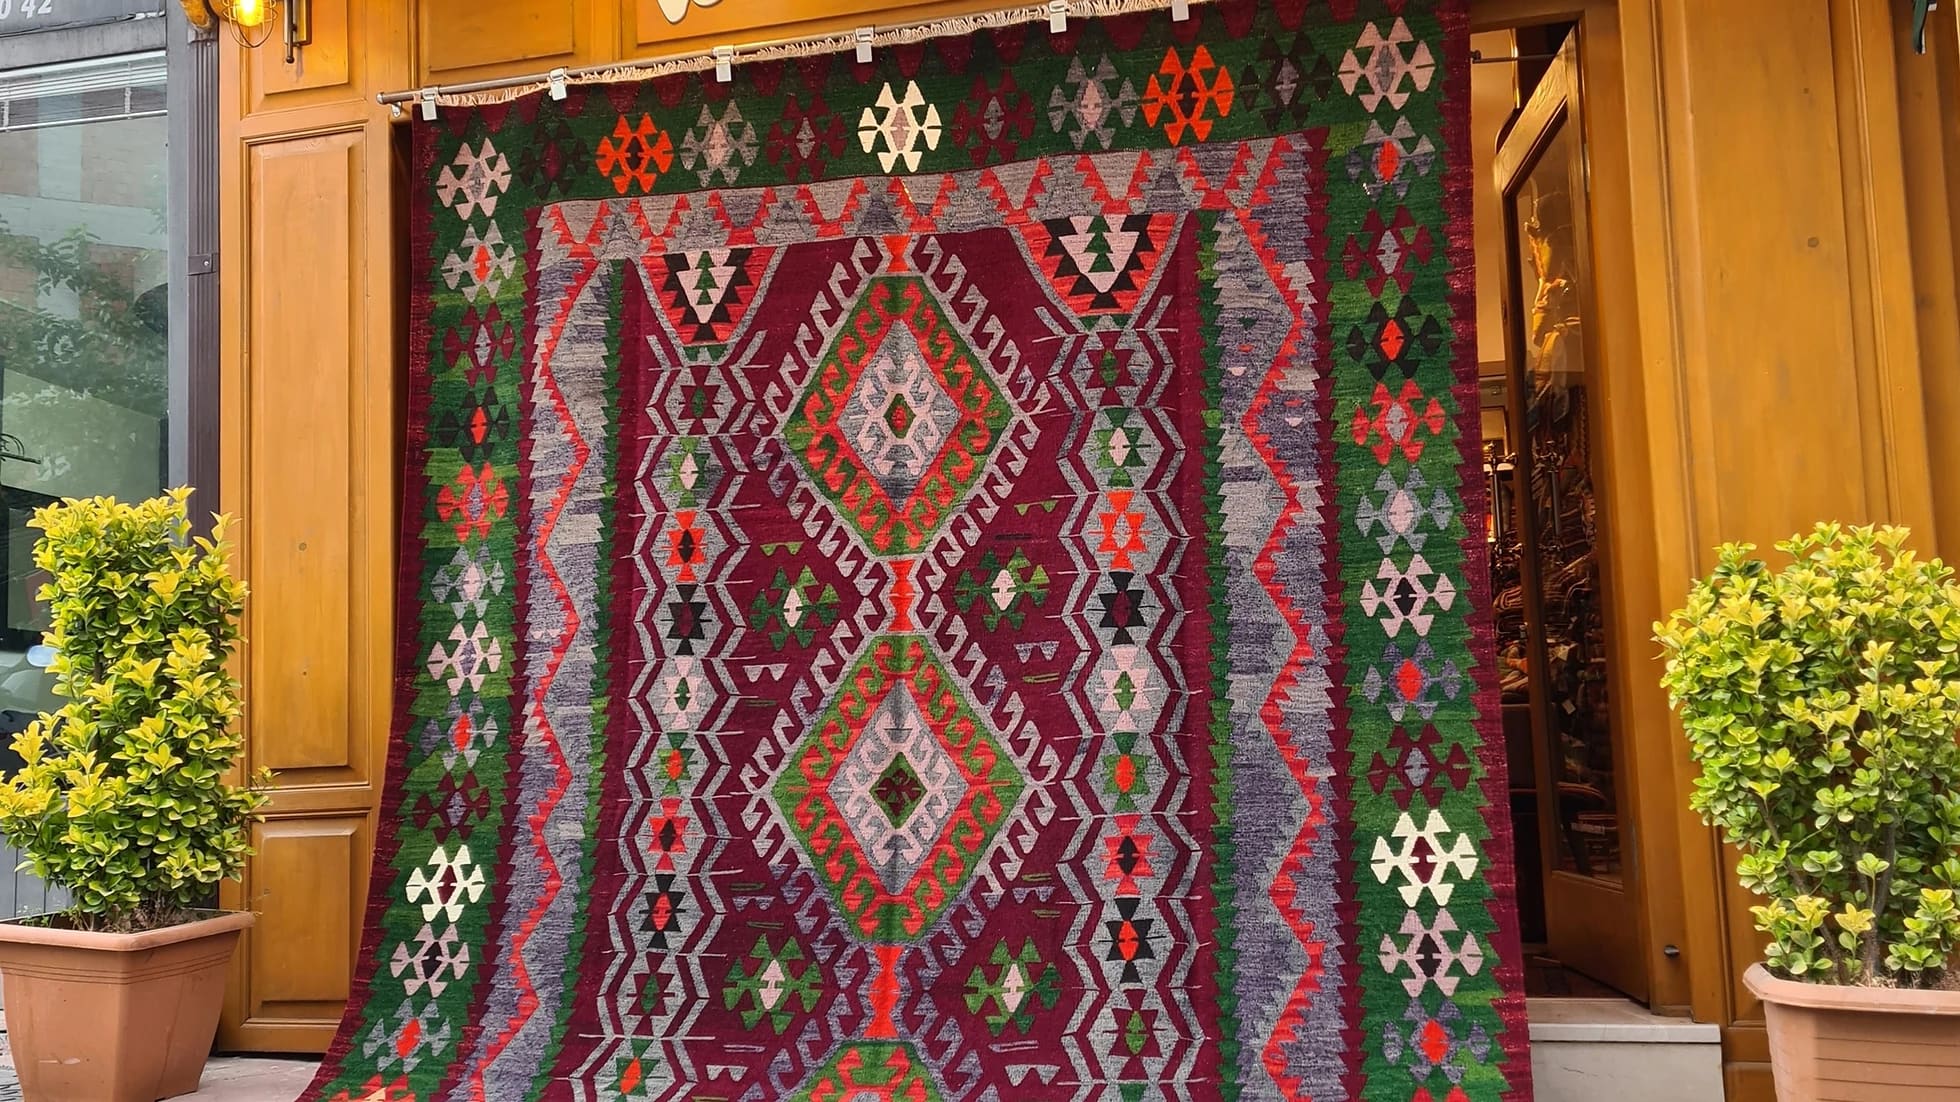 Vintage Handmade Turkish Rug with geometric patterns in red, grey, green in tribal style